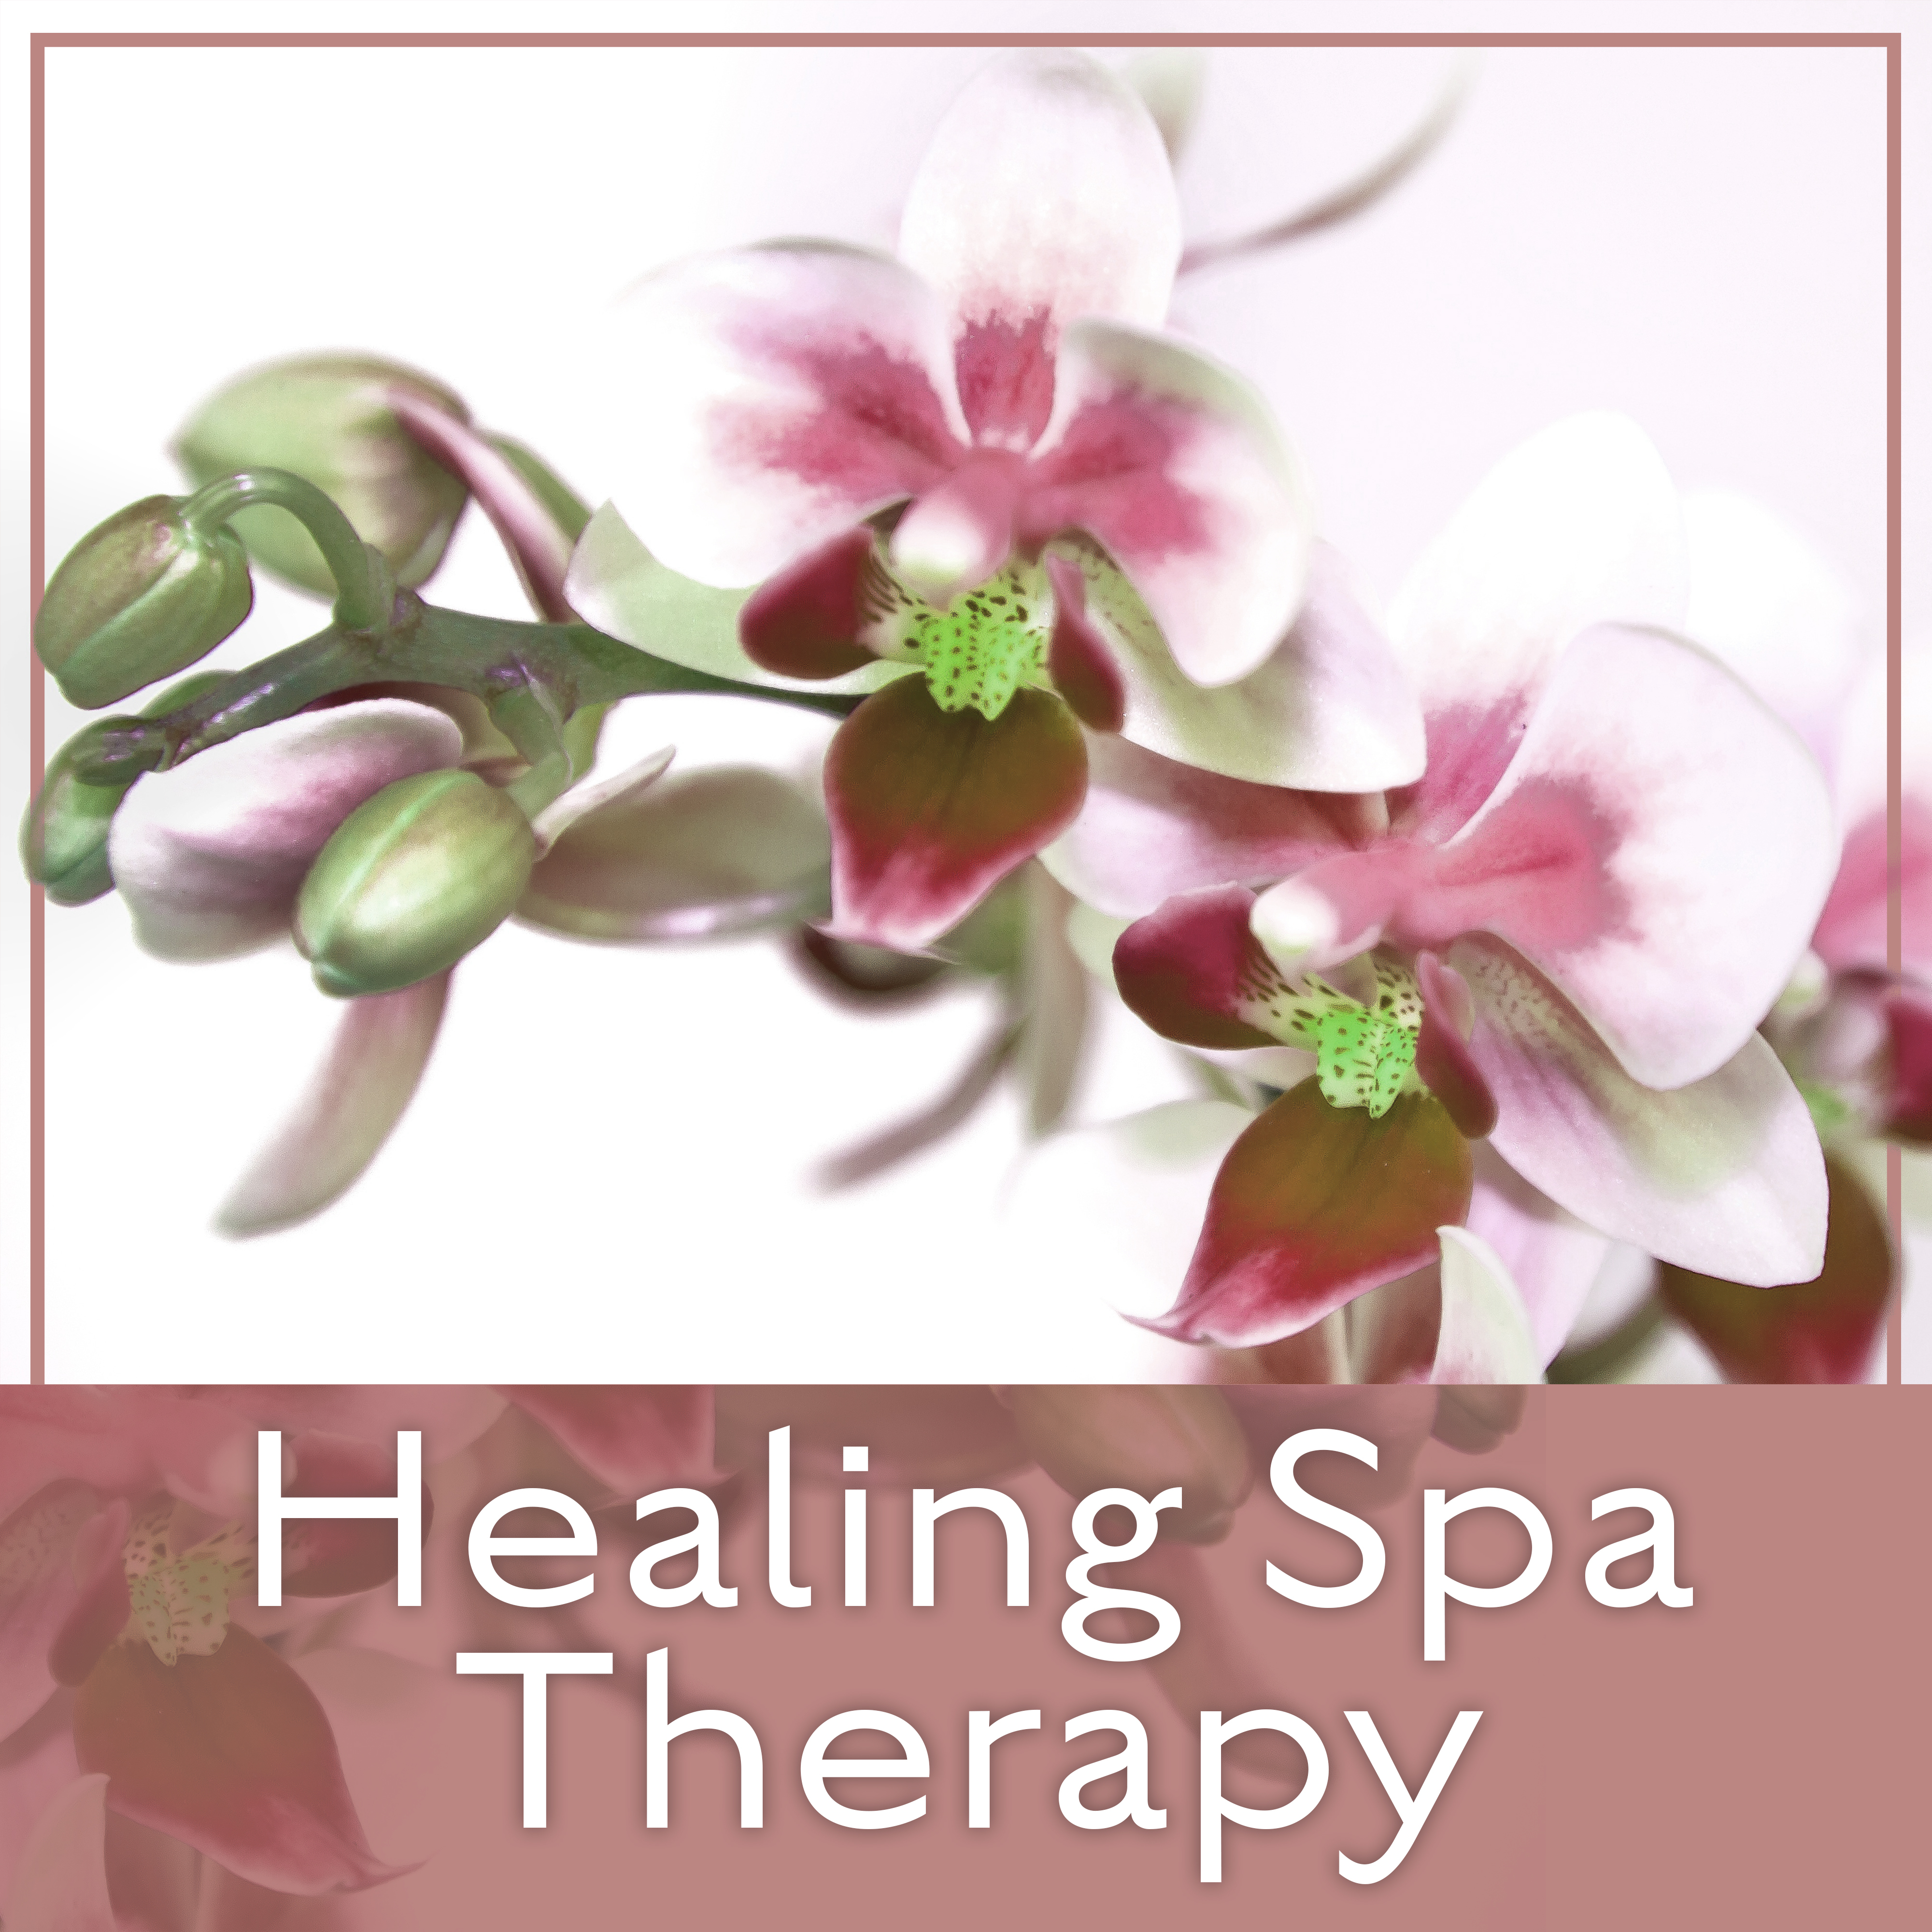 Healing Spa Therapy  New age Sounds for Deep Relaxation,  Spa, Massage, Beauty Parlour Music